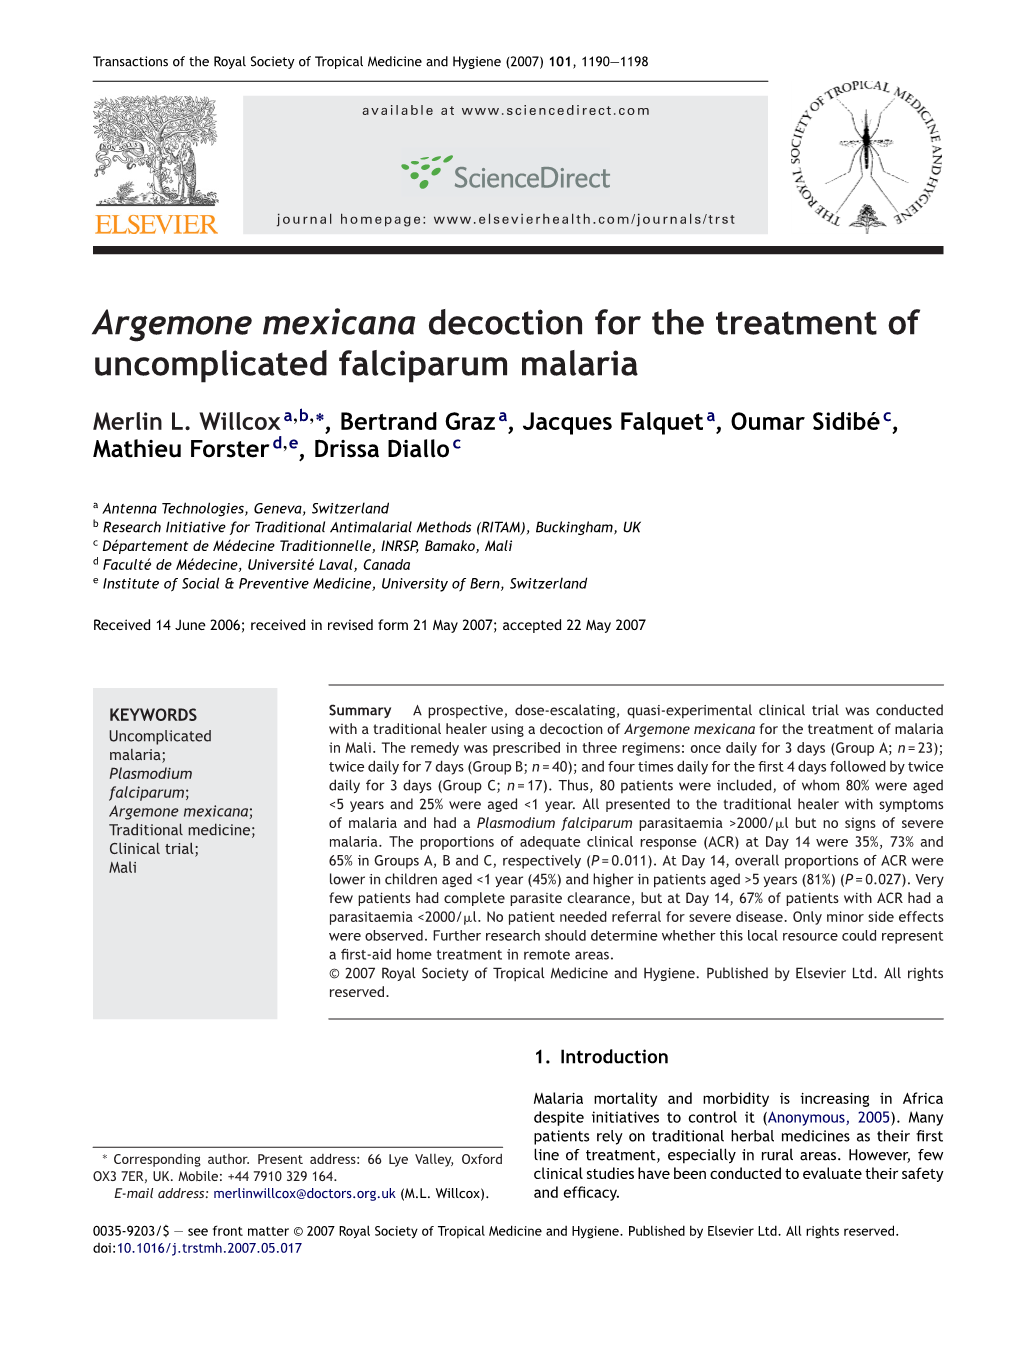 Argemone Mexicana Decoction for the Treatment of Uncomplicated Falciparum Malaria